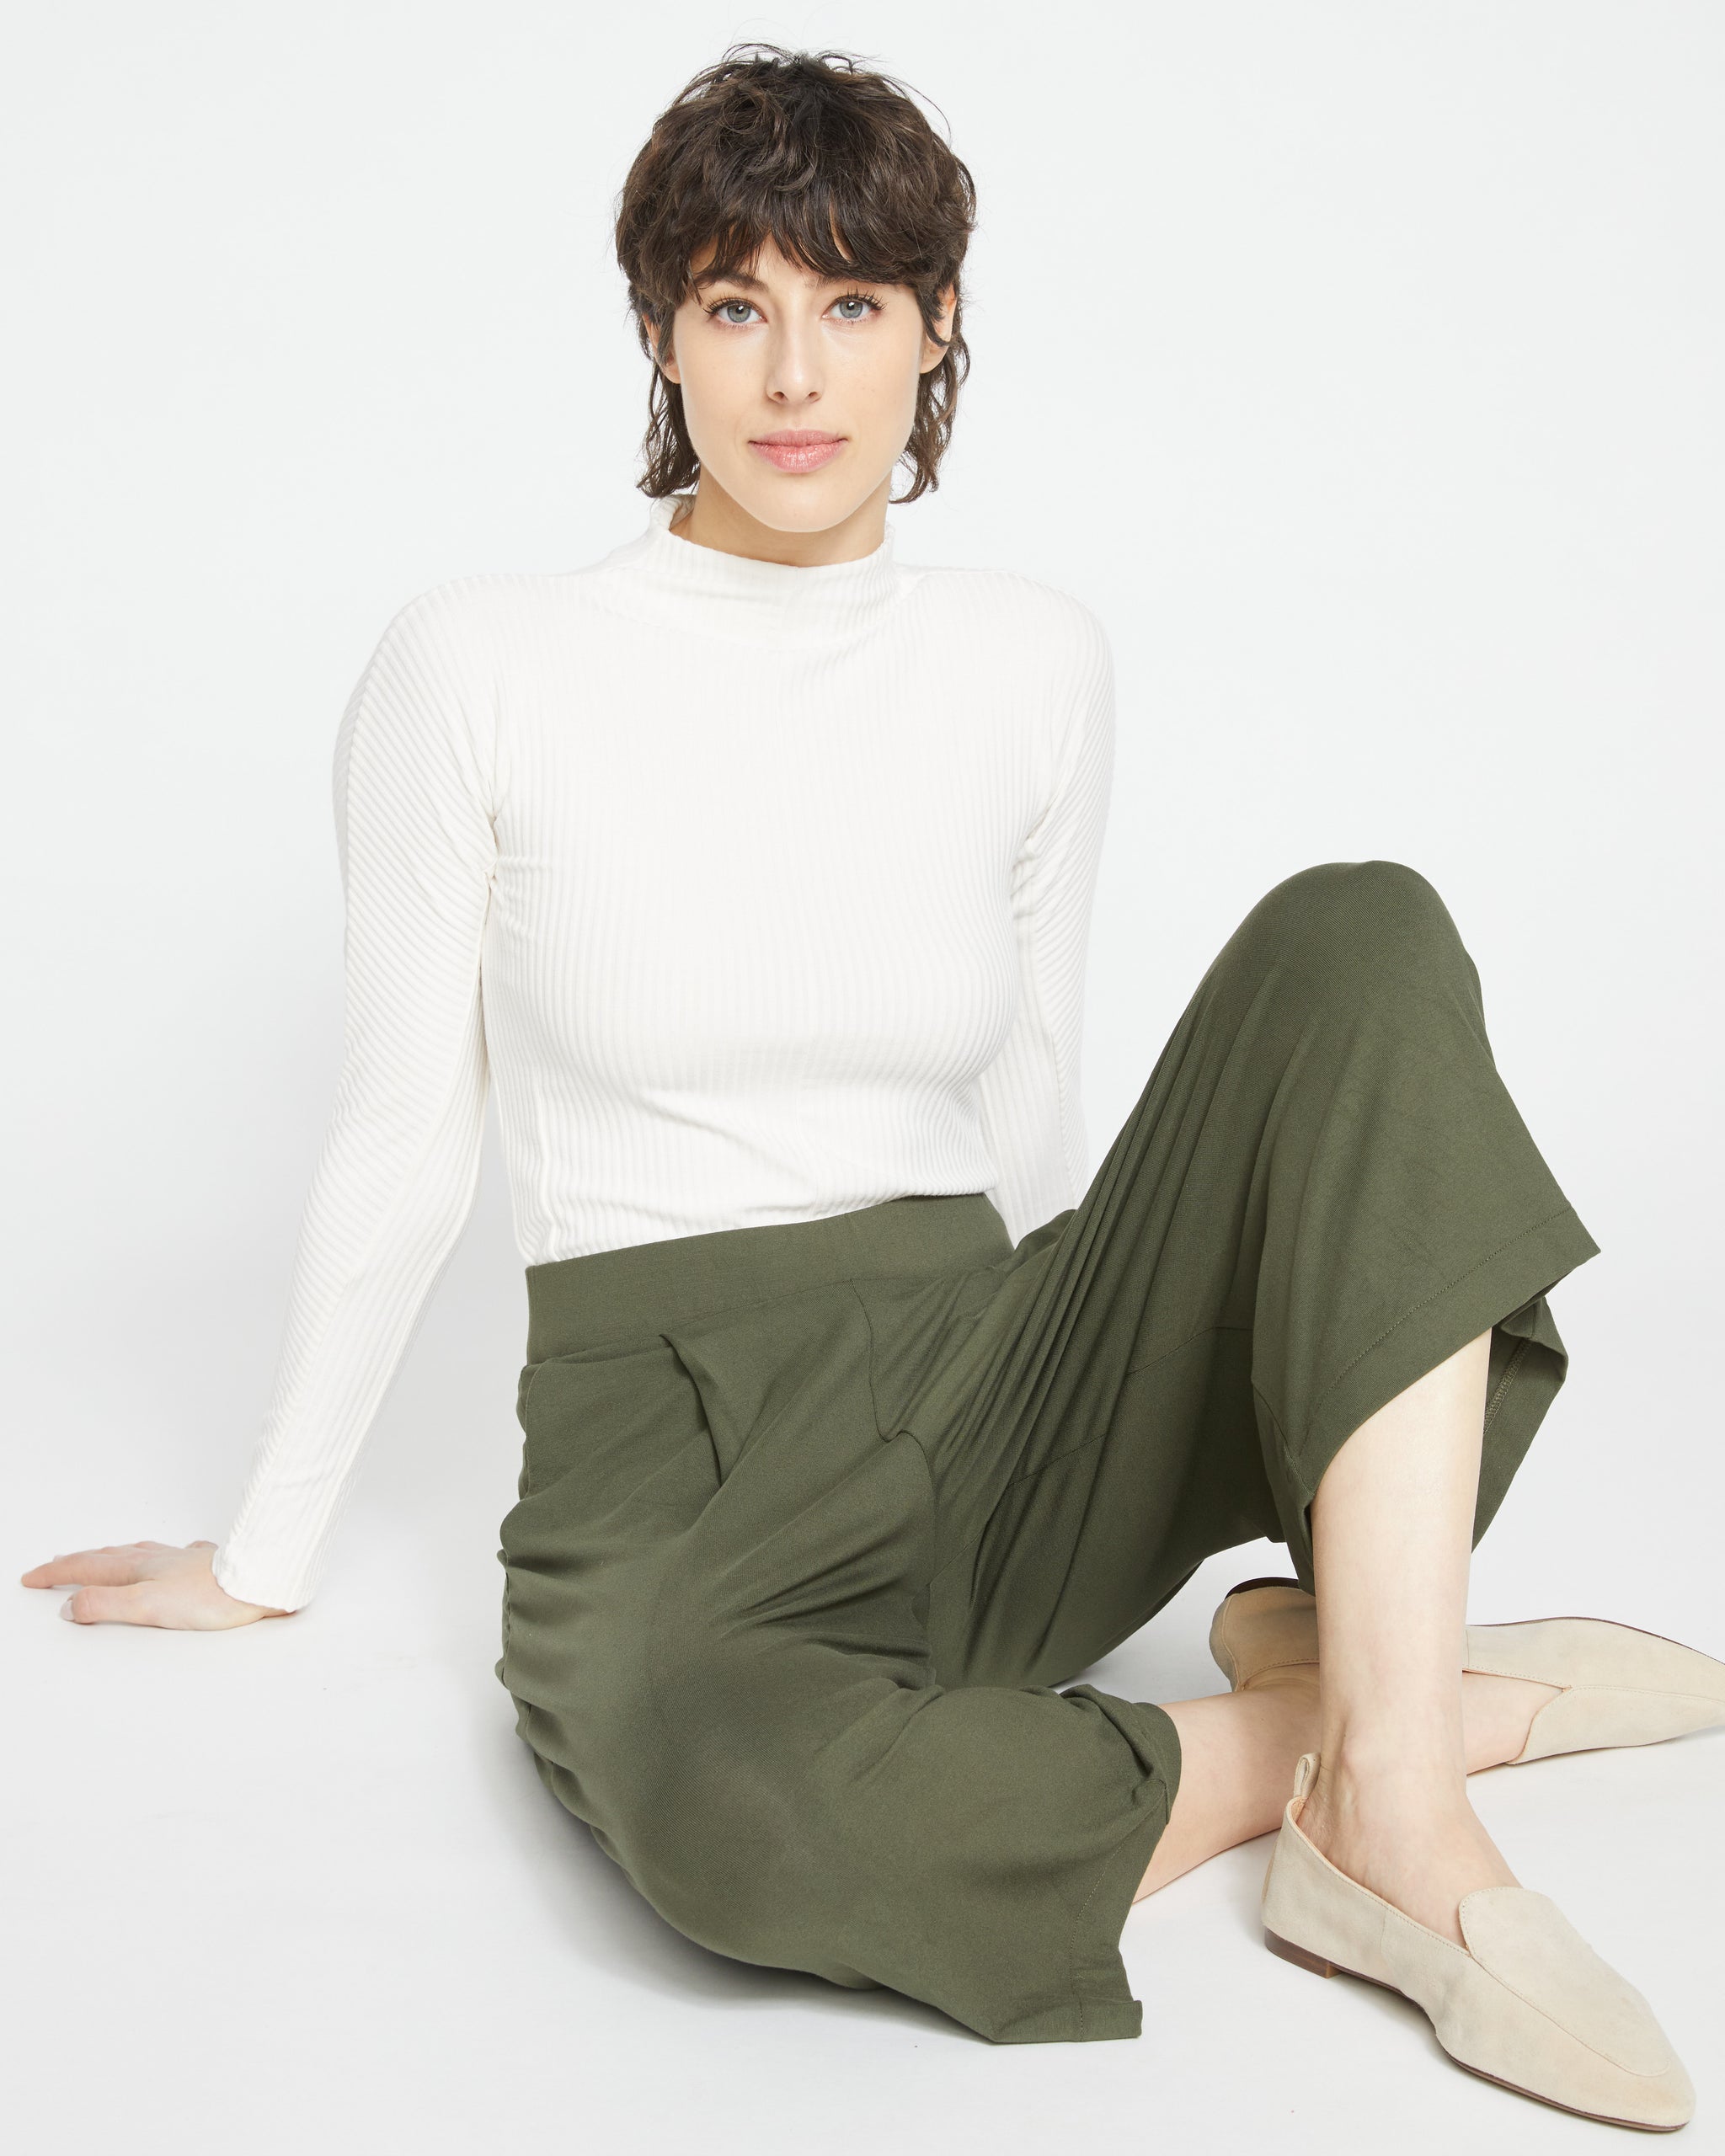 VISCOSE KNIT TROUSERS IN OLIVE